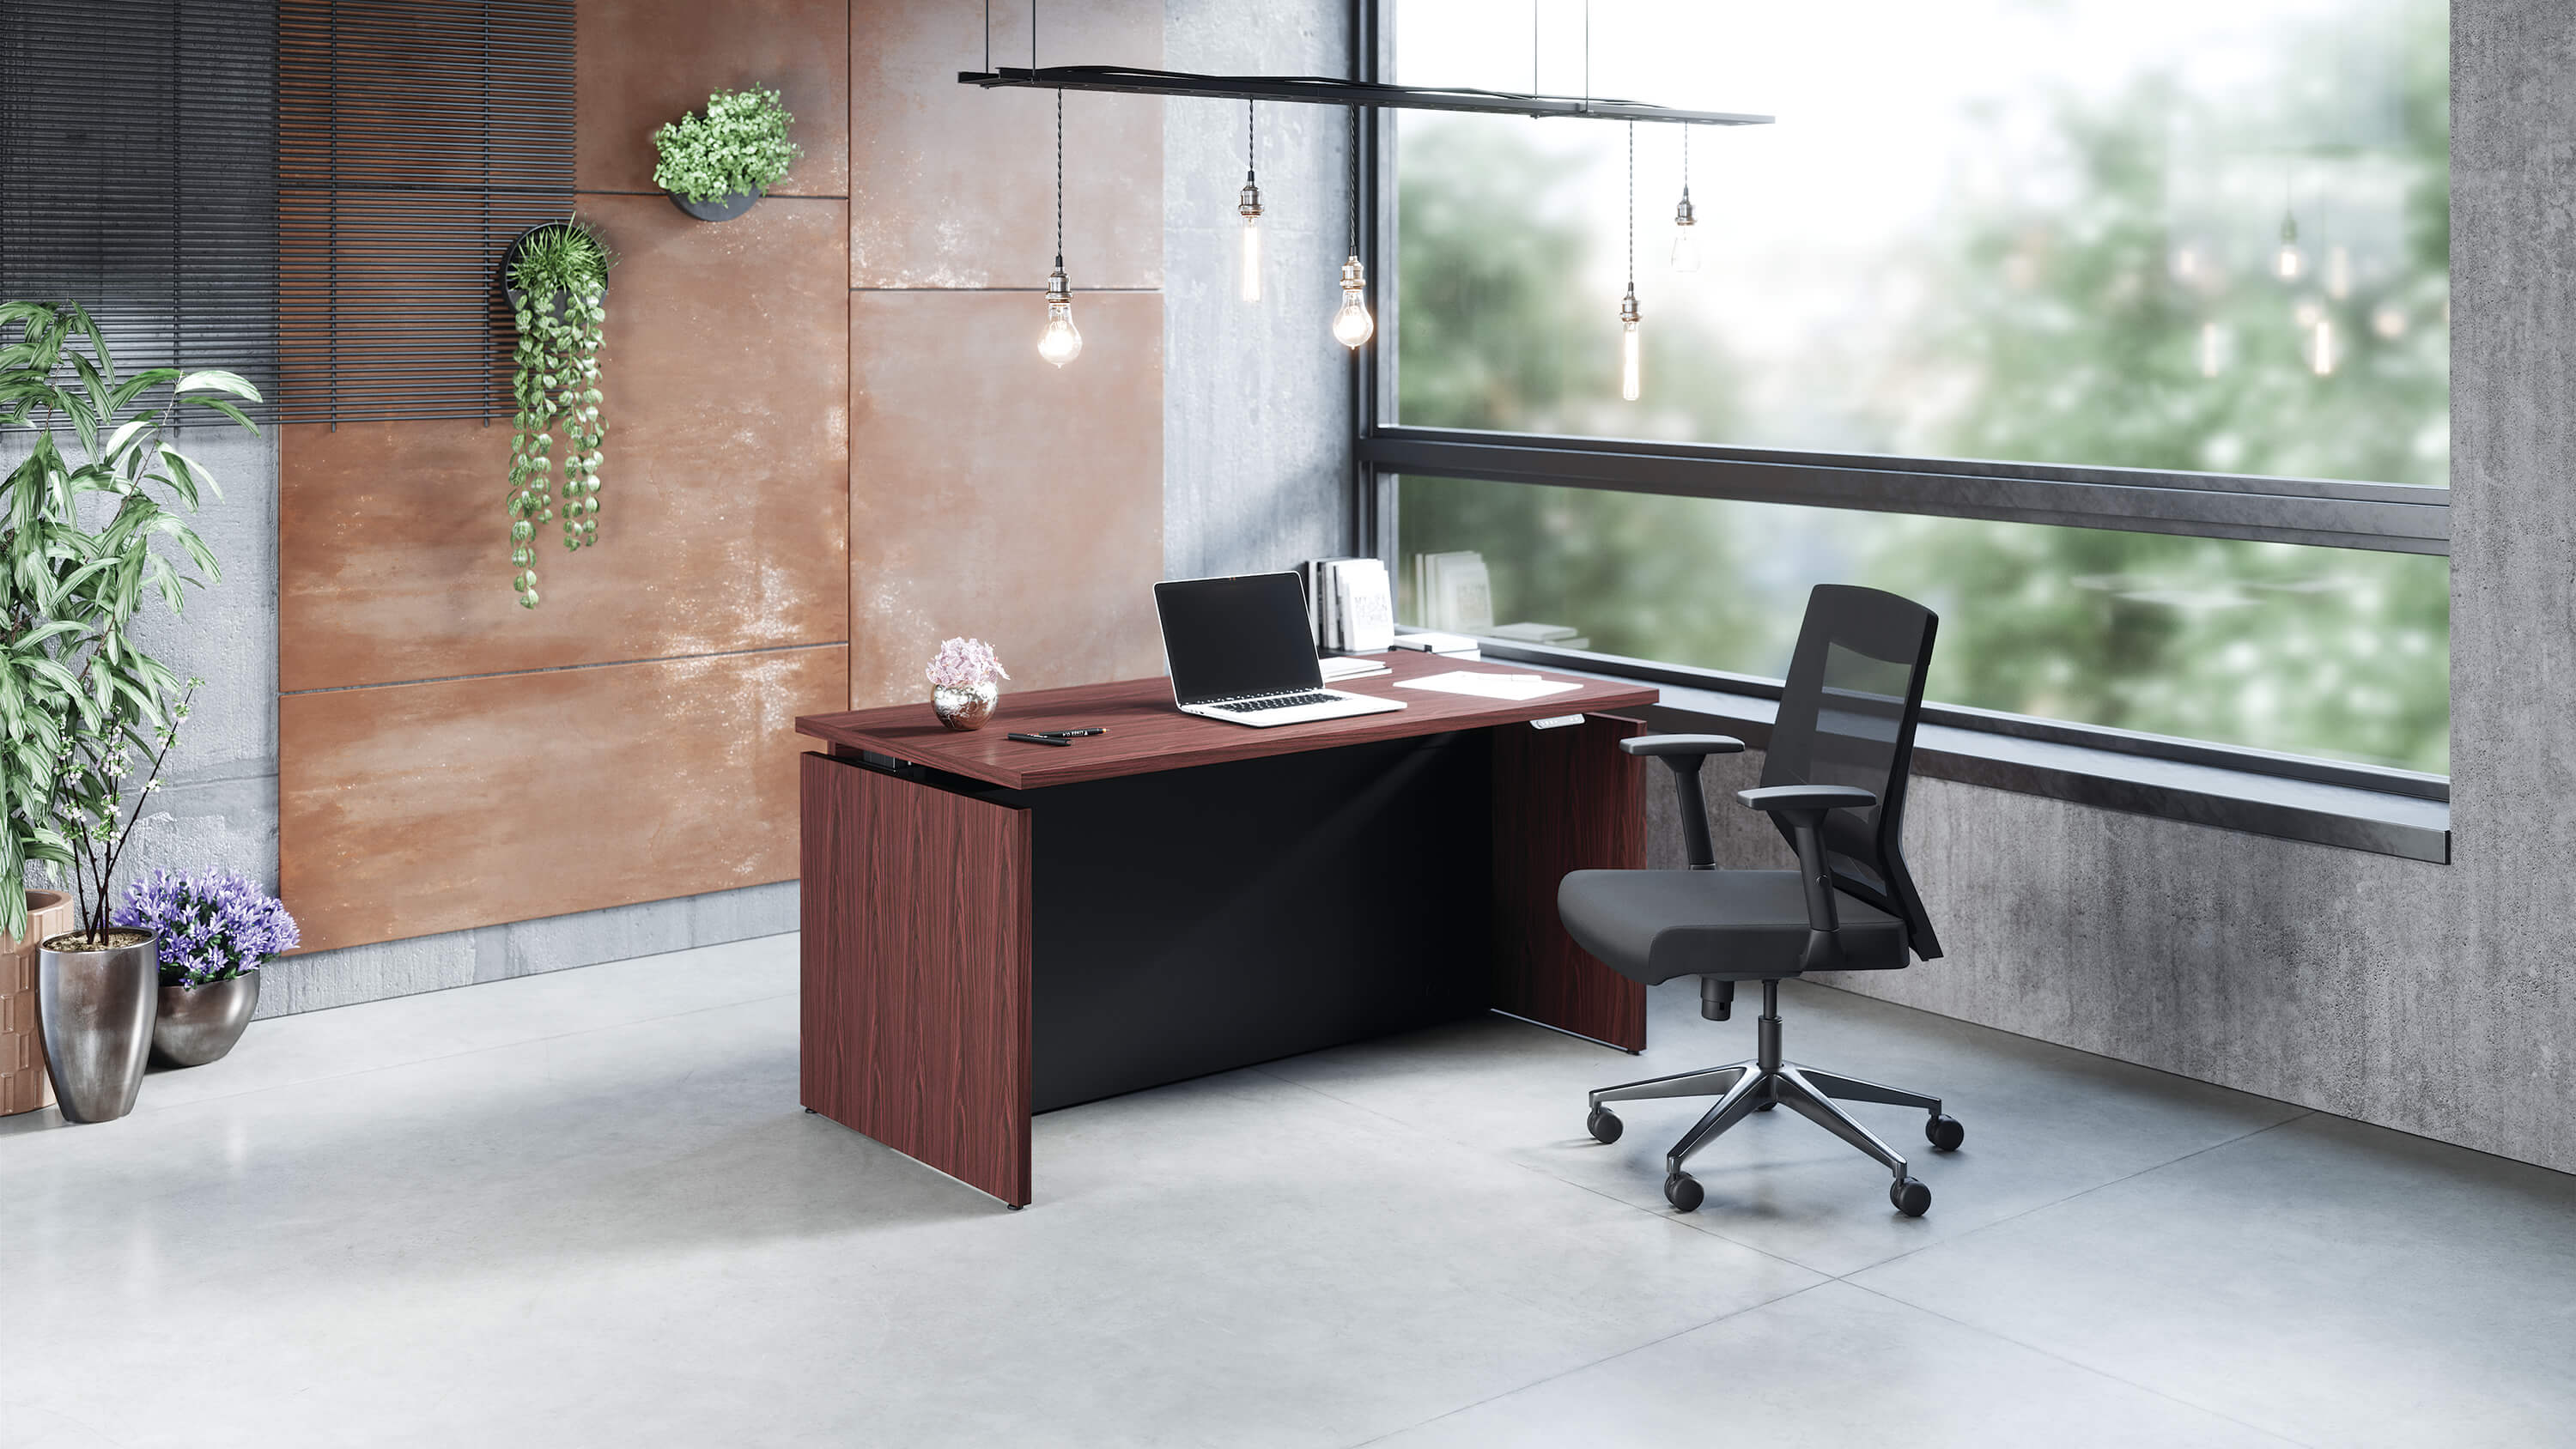 Presidente Executive rectangle electric sit stand desk in seated position in modern private office